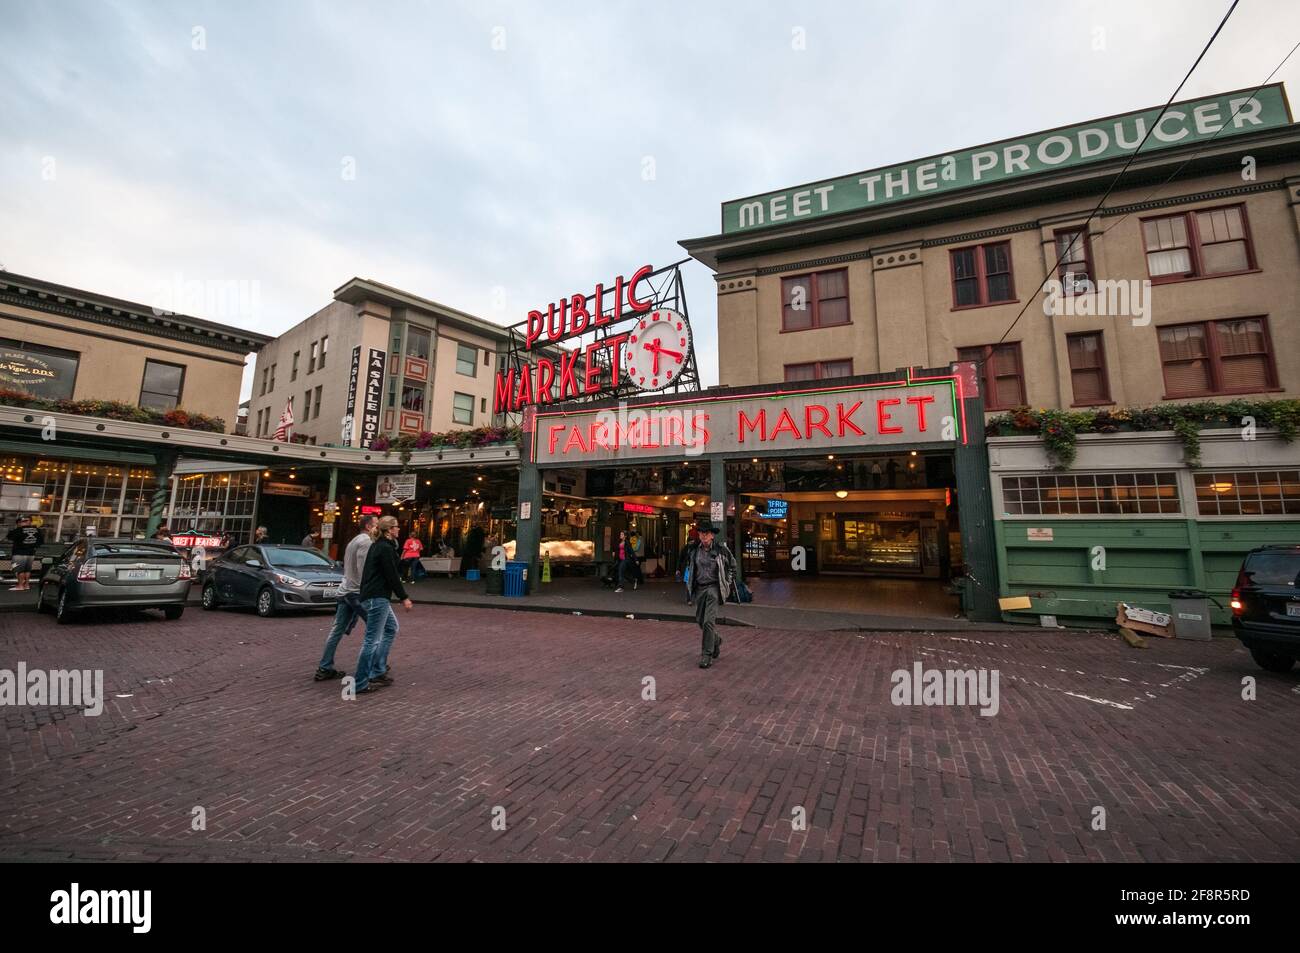 Download Our App — Pike Place Chowder – Seattle, WA